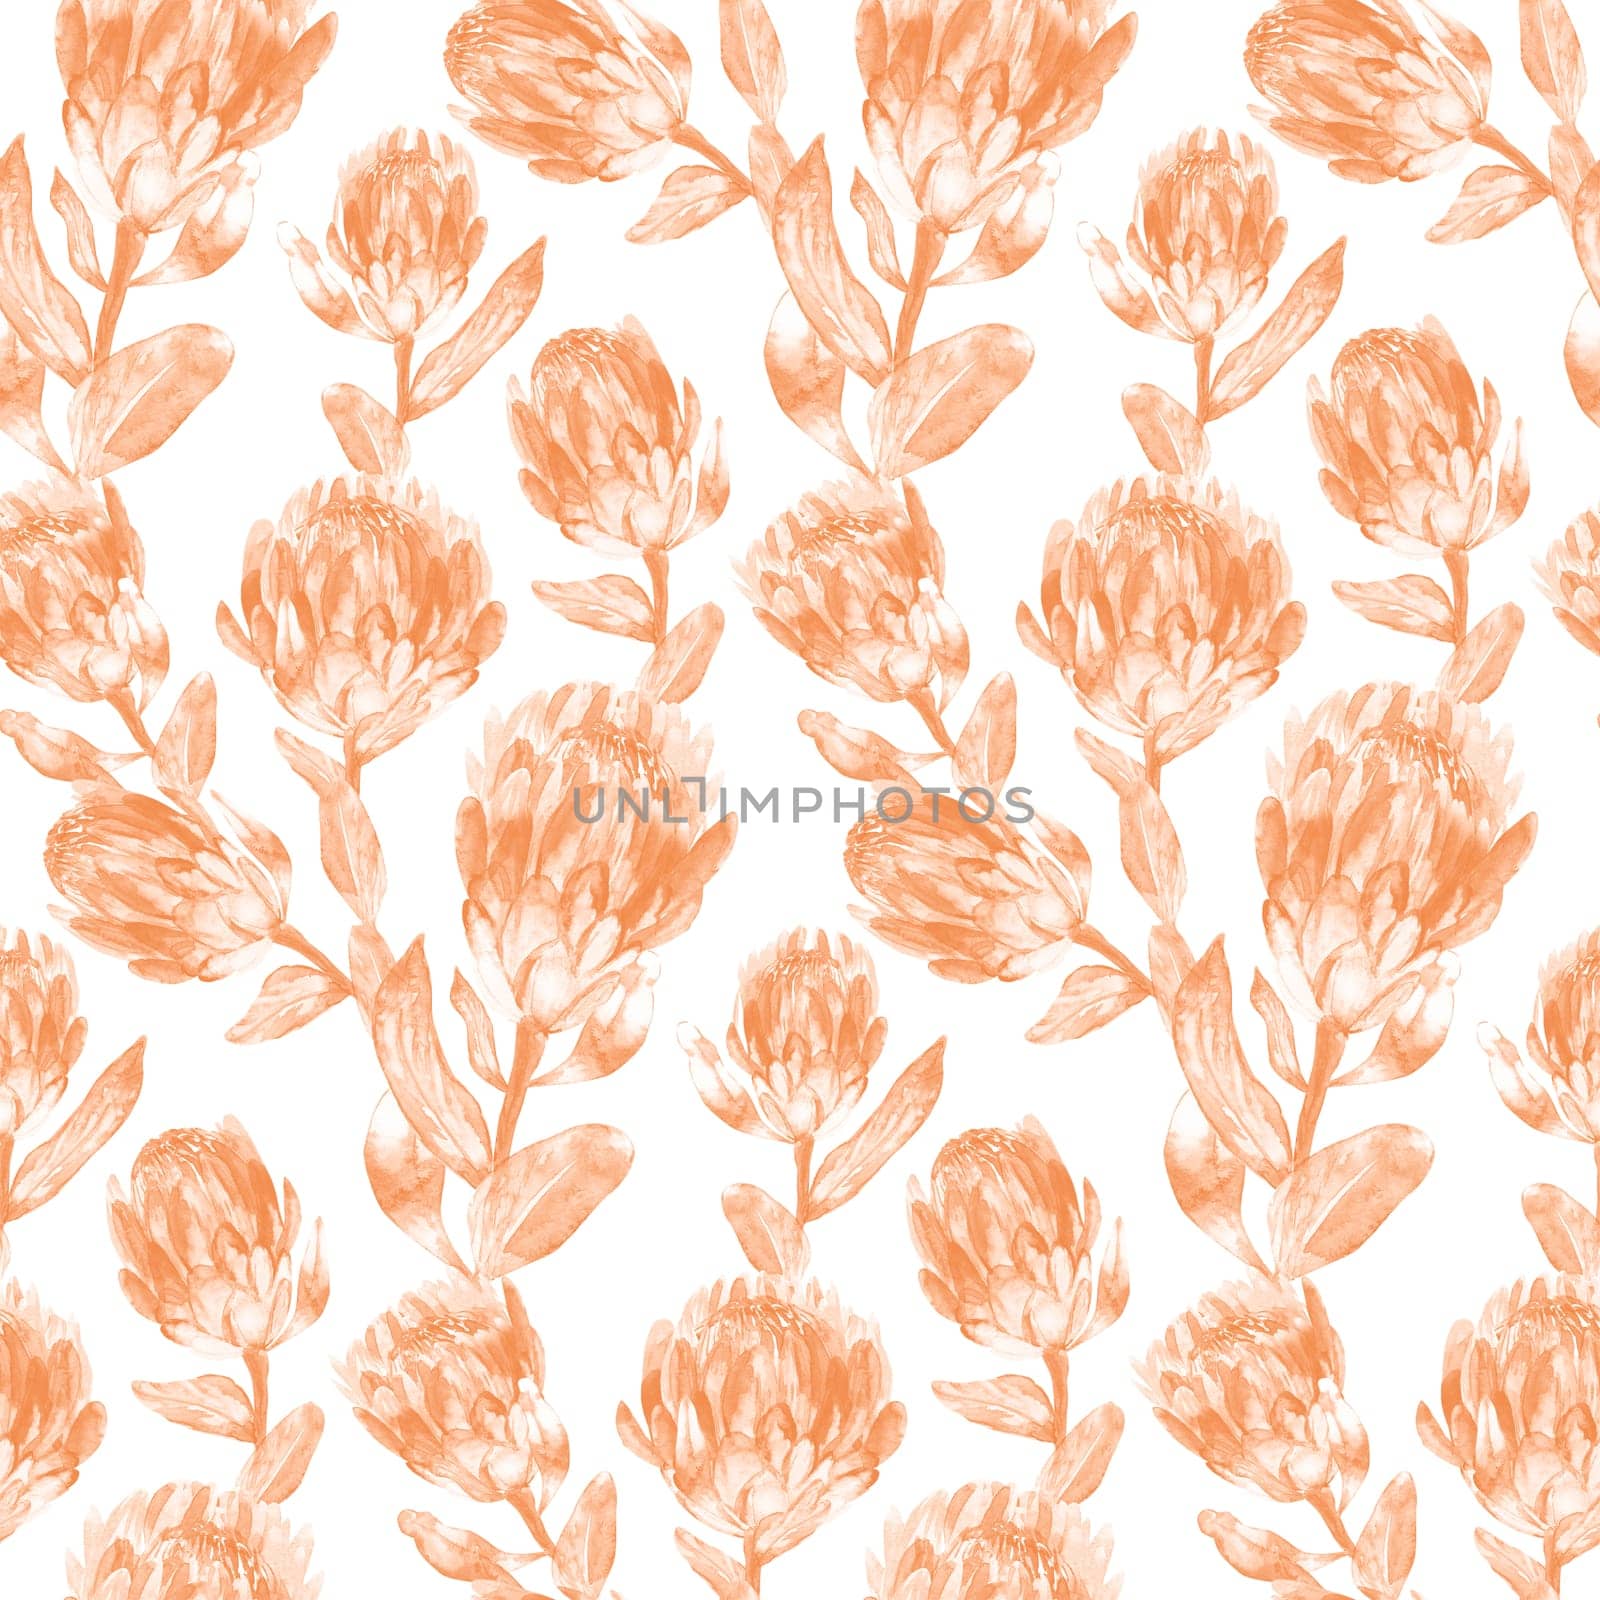 Seamless monochrome watercolor pattern with vertical protea flowers for textile and surface design